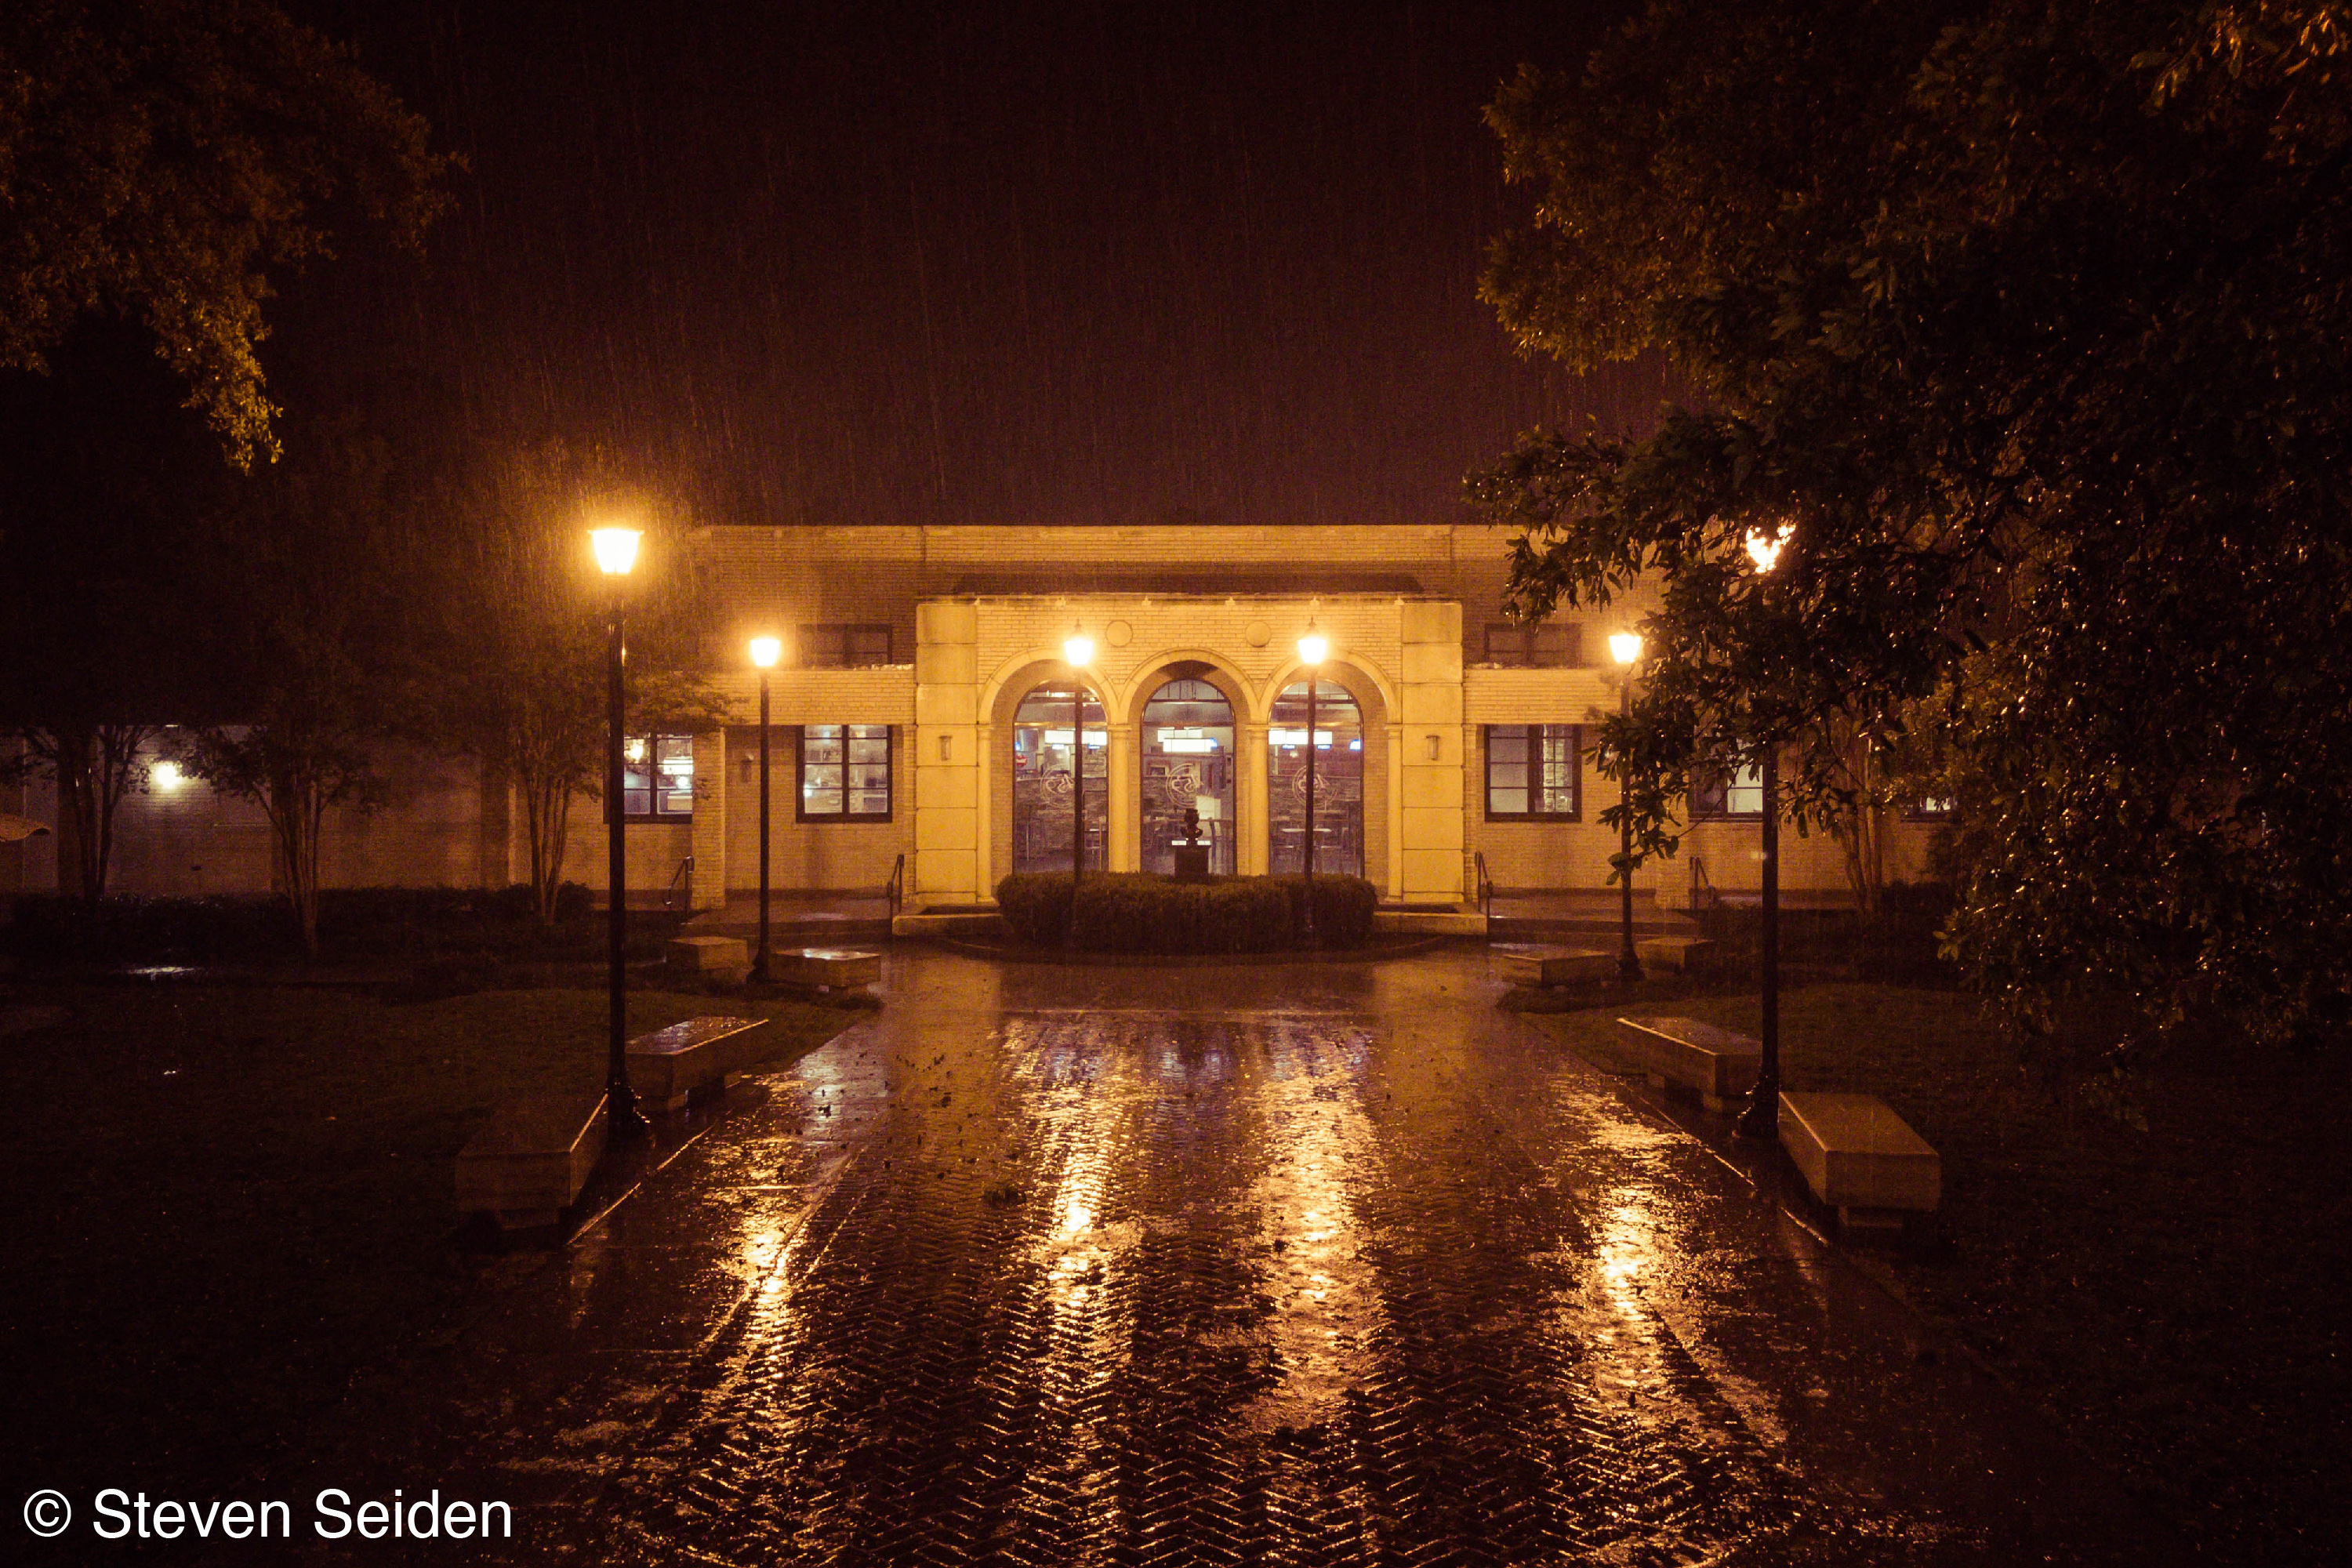 A picture of a building taken in the rain at night.